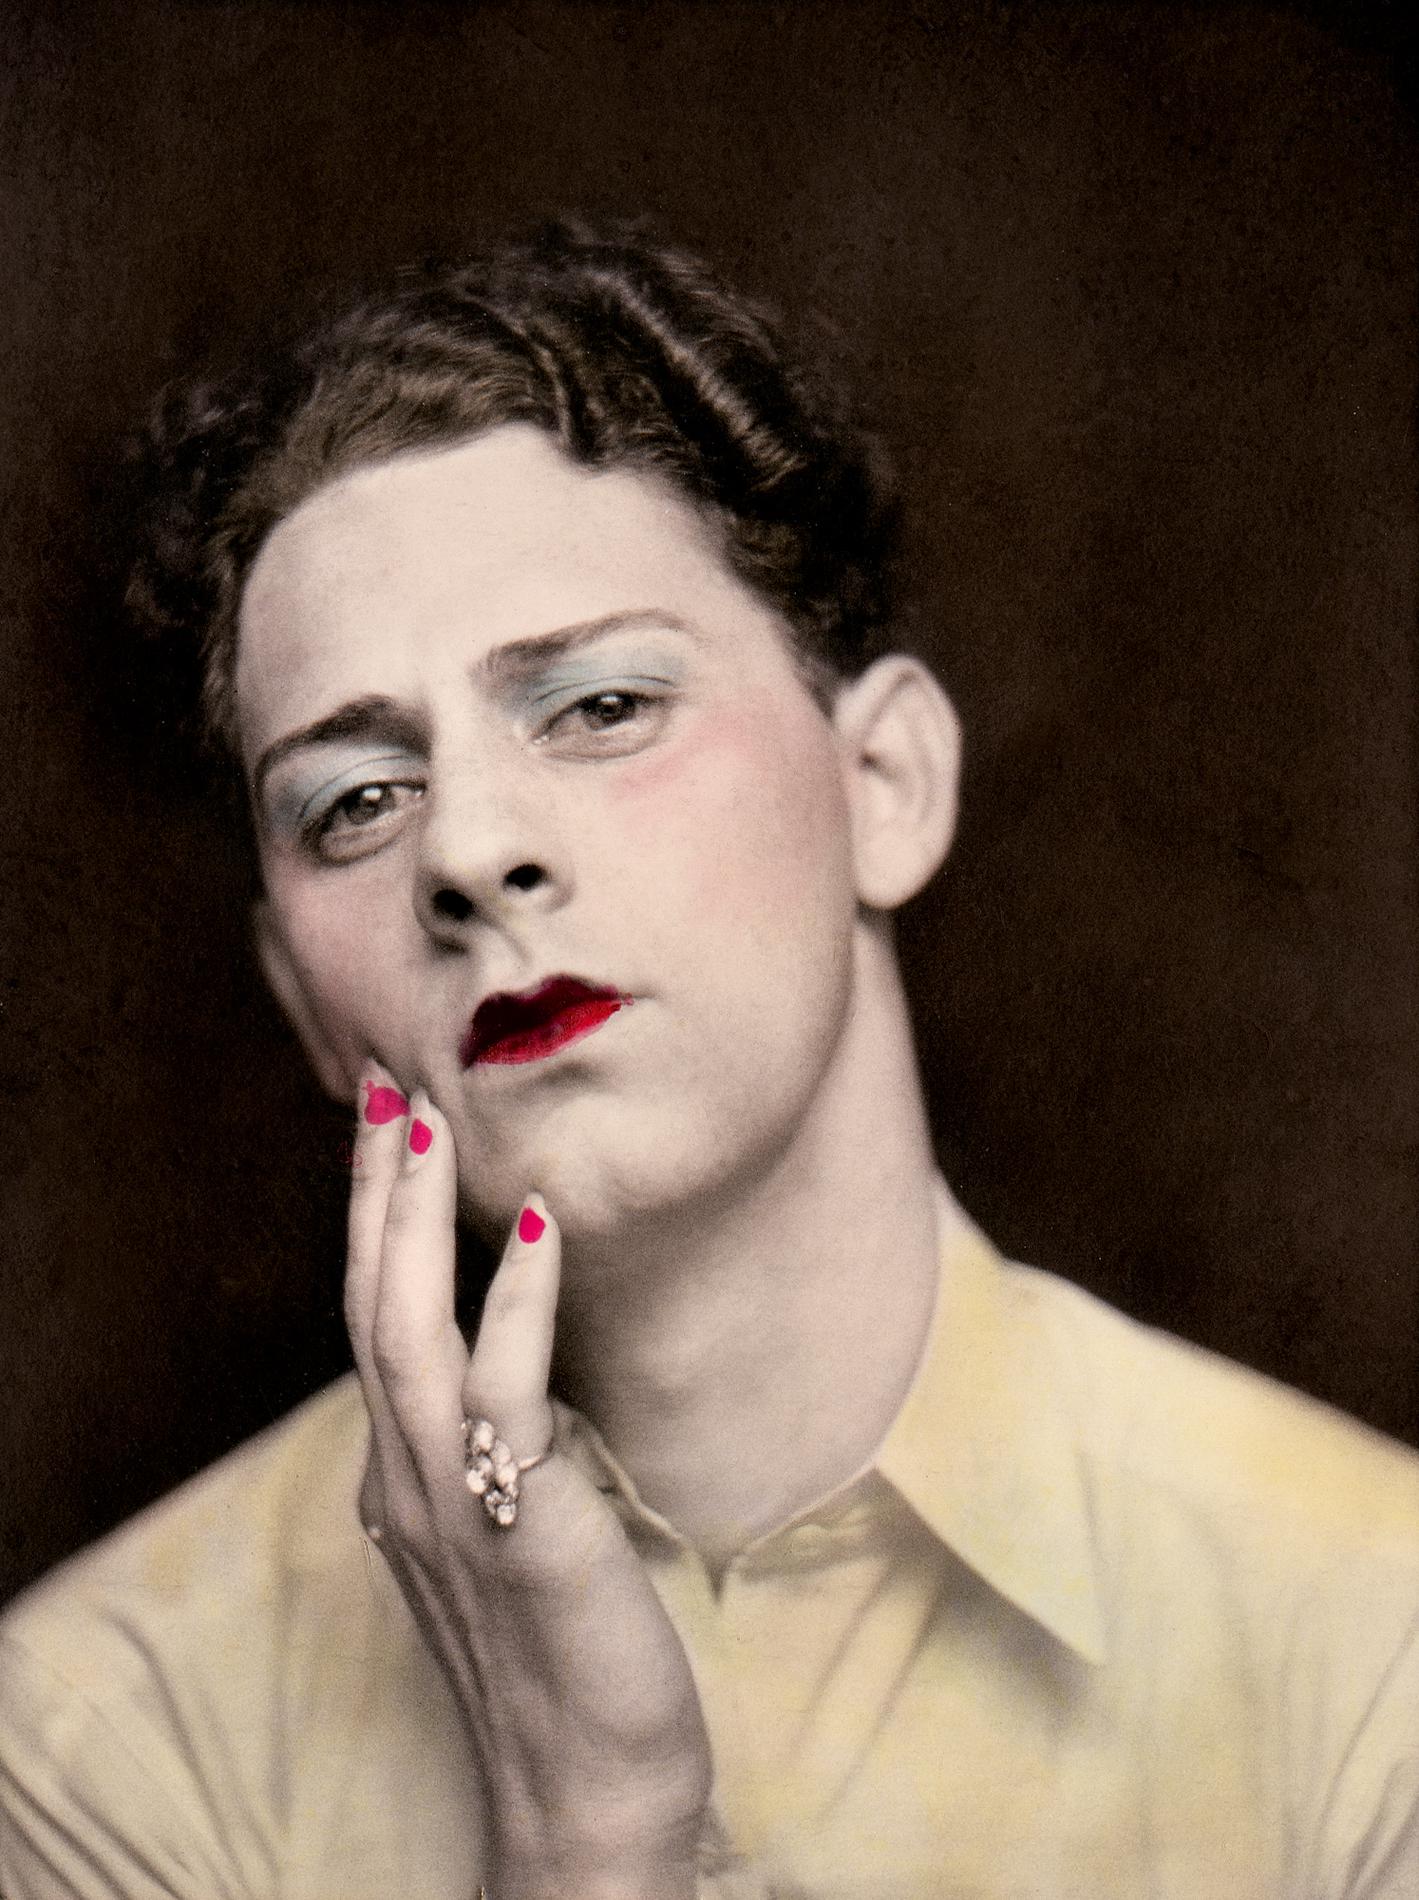 Man in make-up wearing a woman’s ring, United States - photobooth print with colour retouching